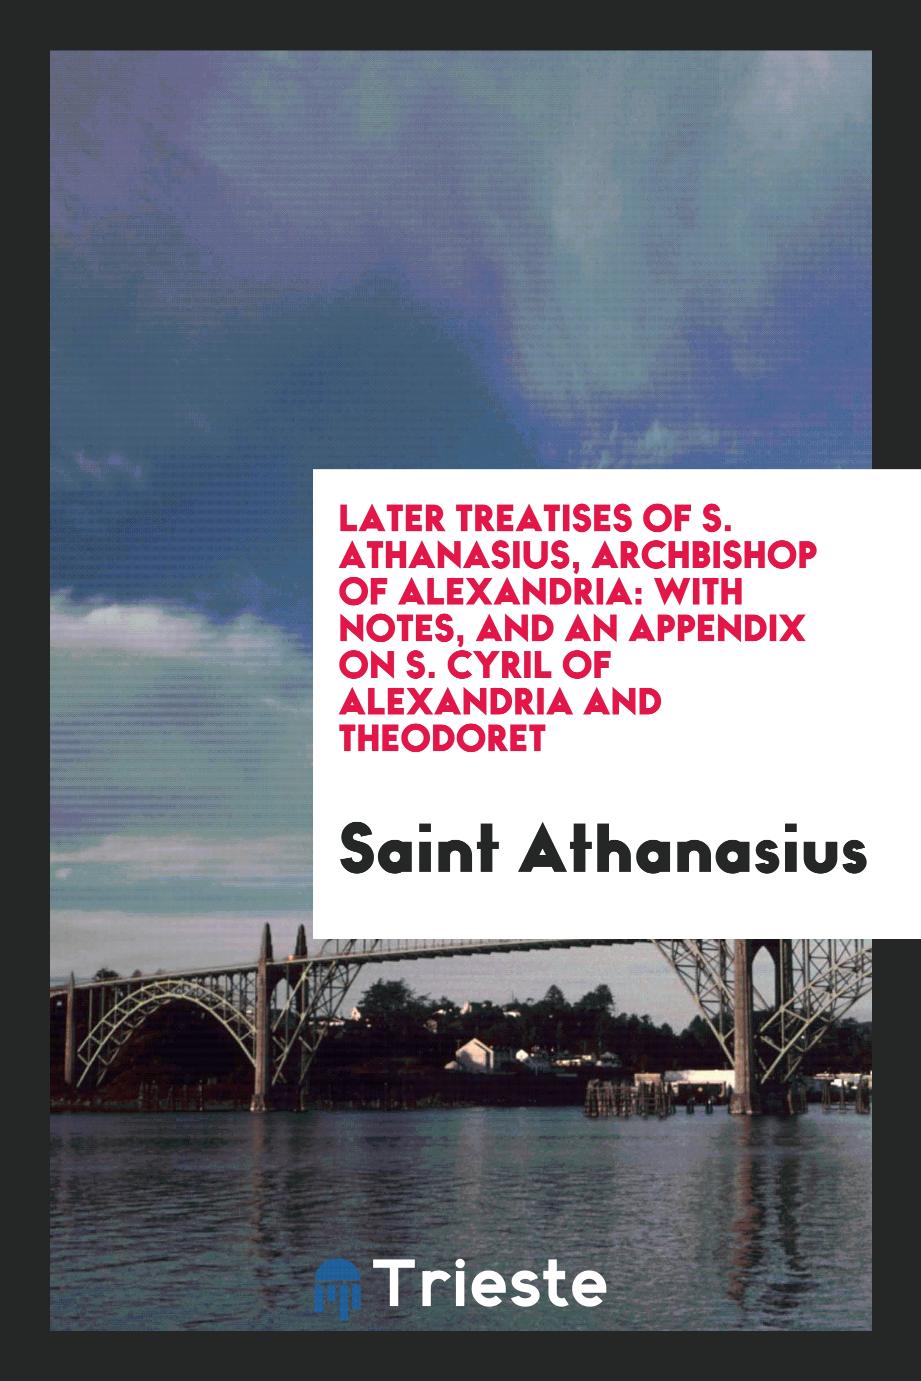 Later treatises of S. Athanasius, Archbishop of Alexandria: with notes, and an appendix on S. Cyril of Alexandria and Theodoret